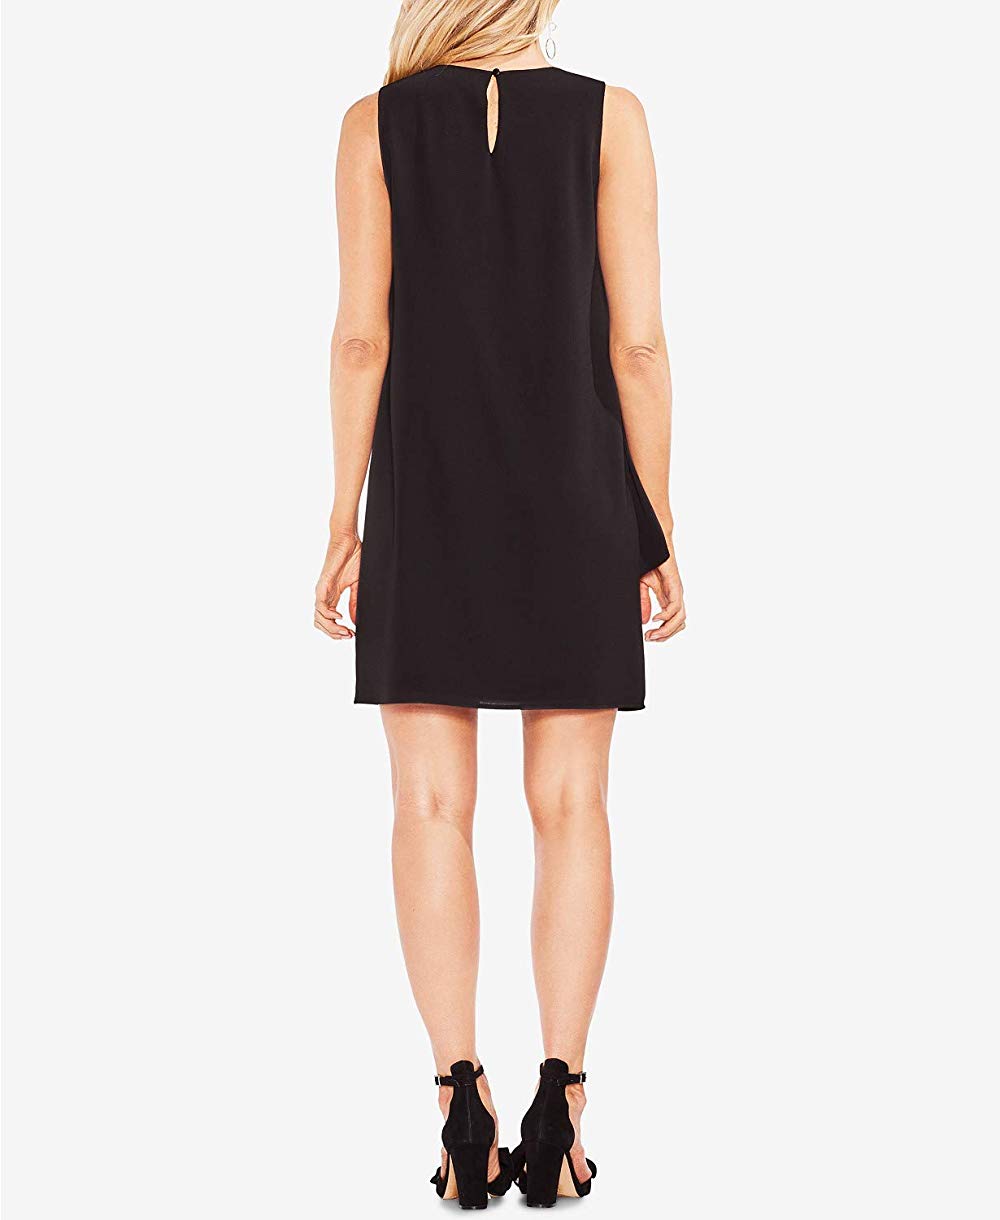 Vince Camuto Womens Asymmetrical Tiered Shift Dress